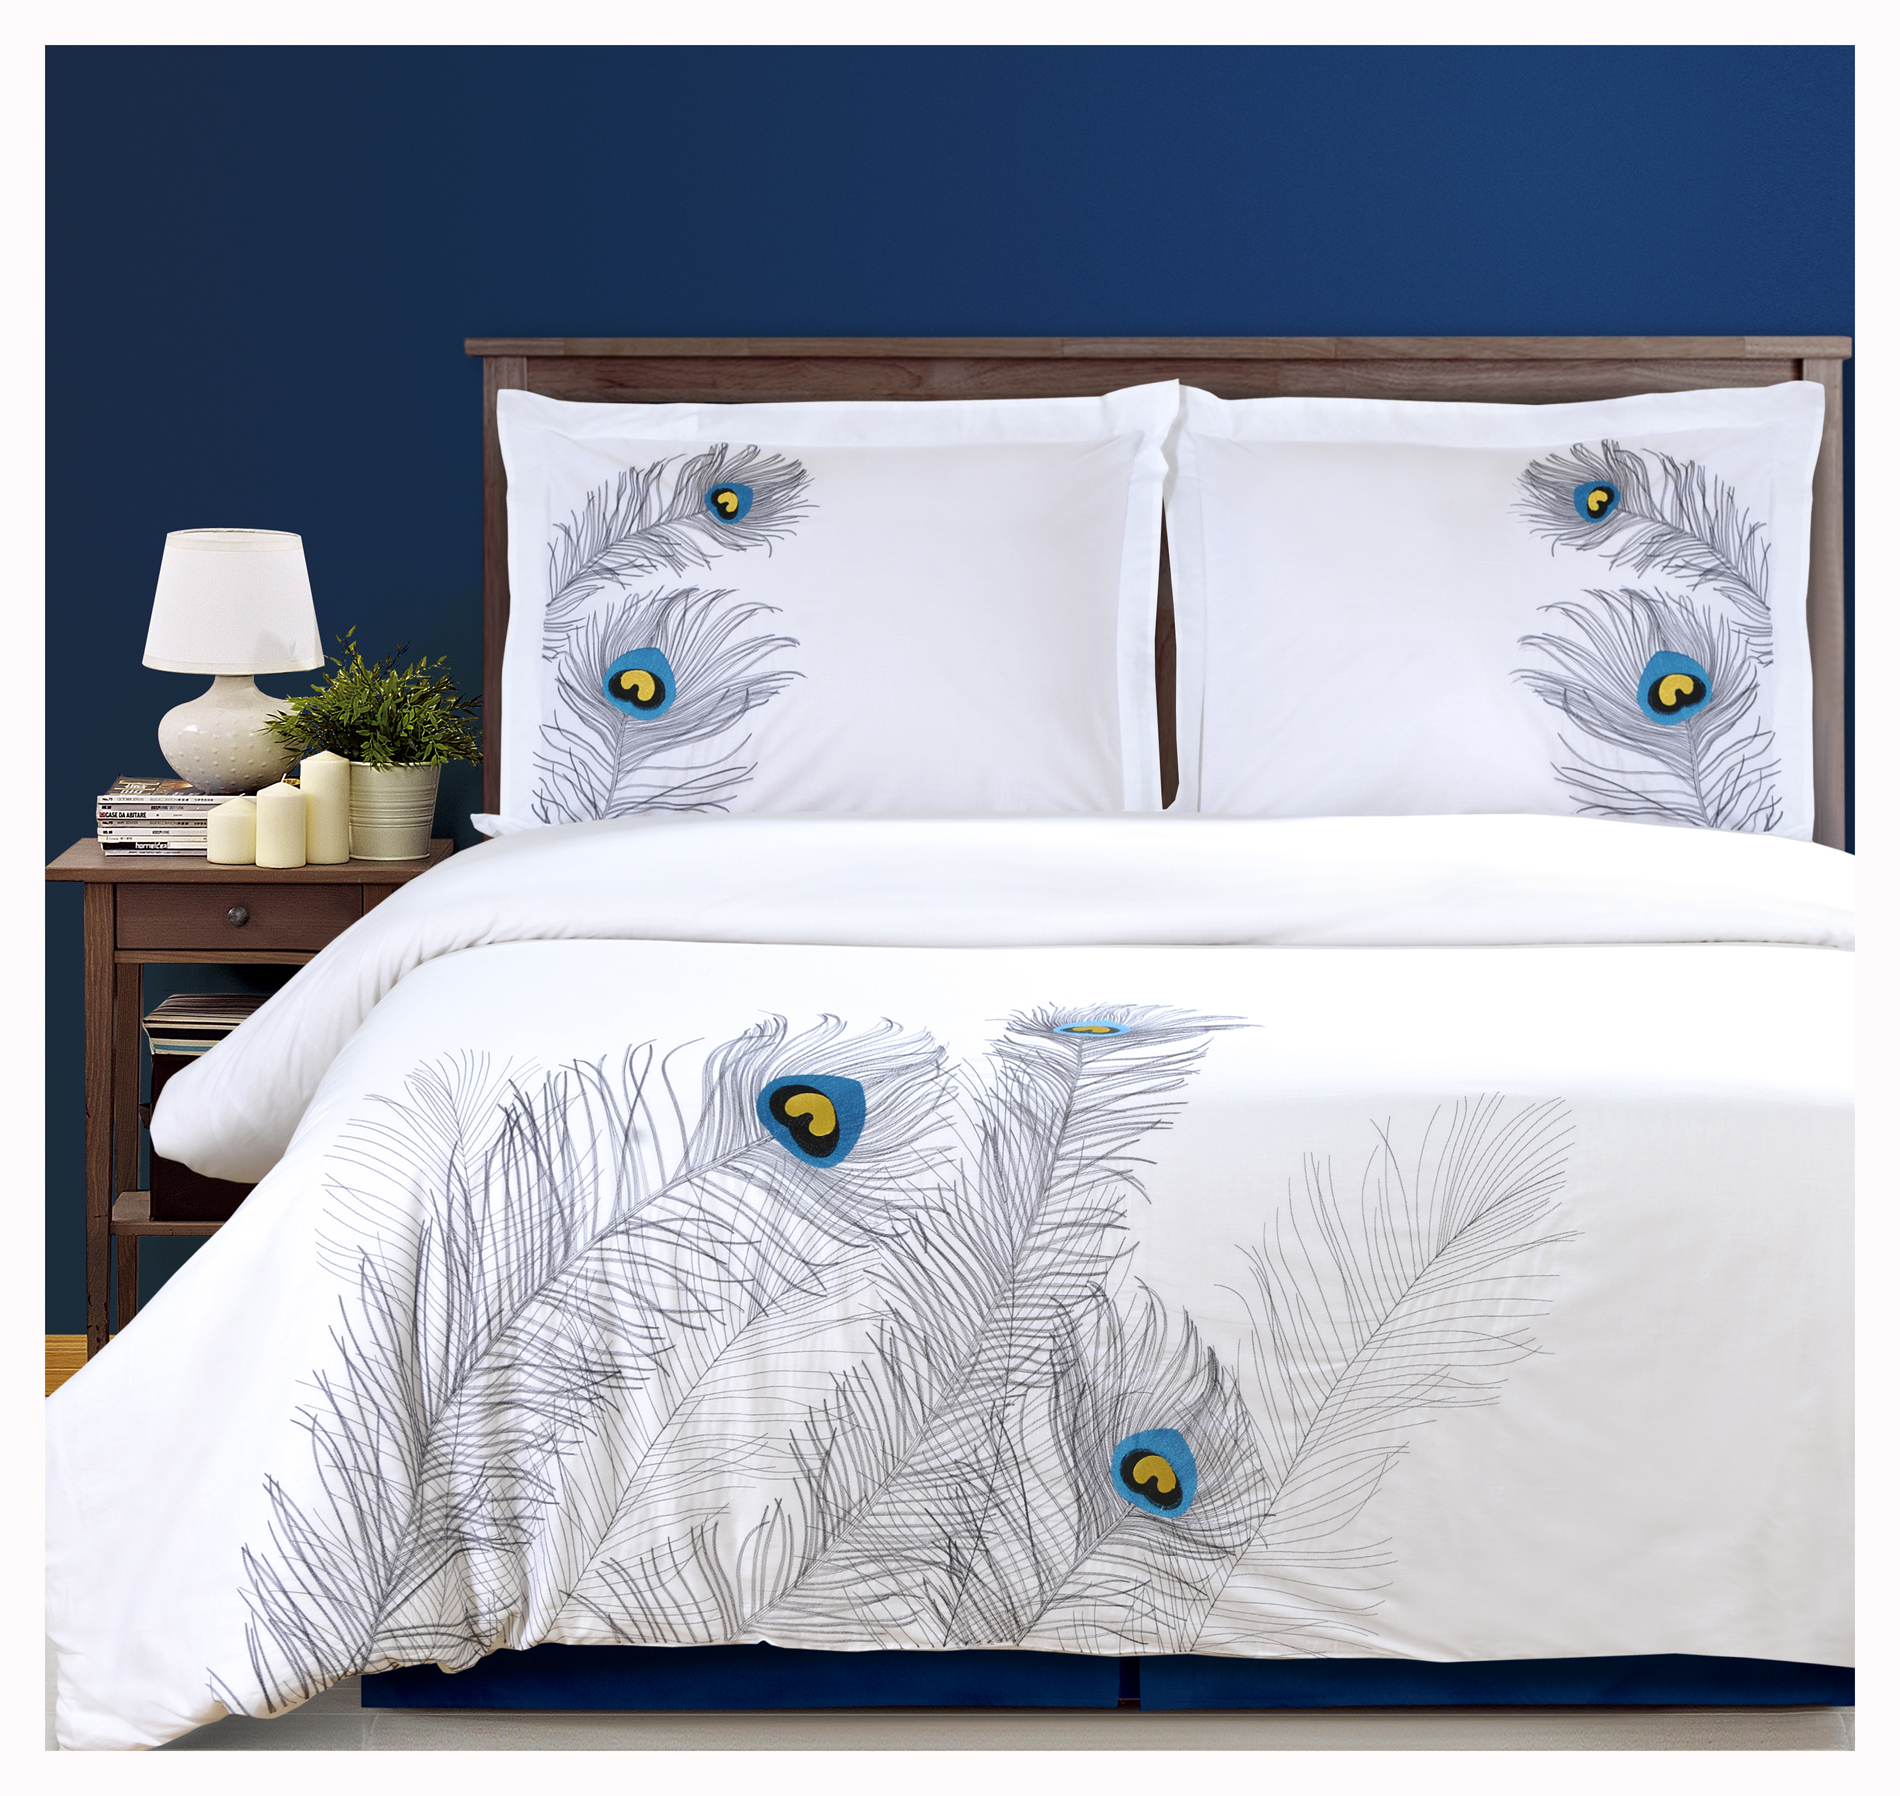 IMPRESSIONS Duvet Cover Set With Pillow Shams, Embroidered Feather PEACOCK Design